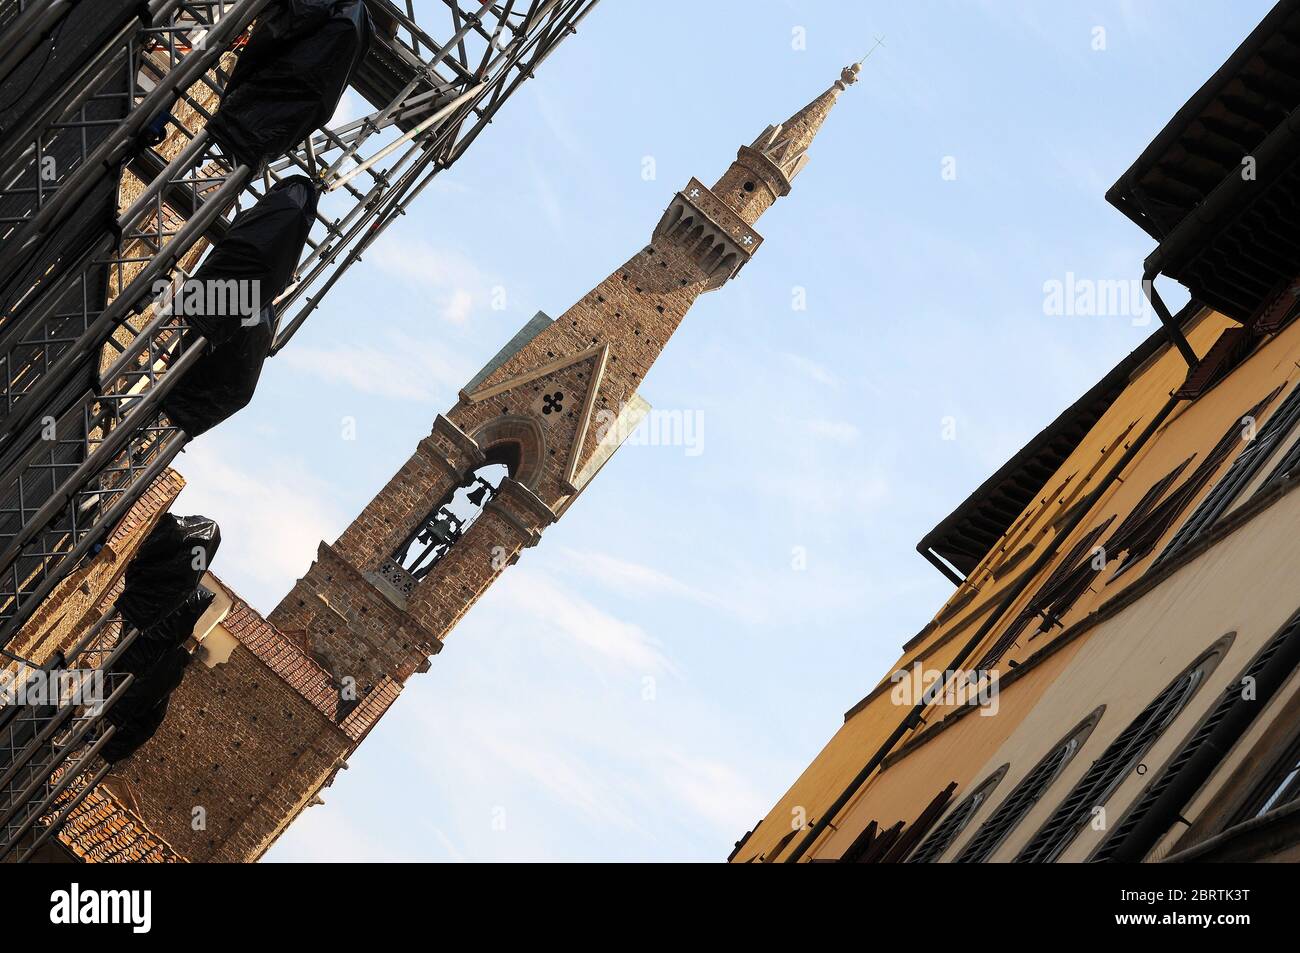 View from the Piazza Santa Croce, Florence. Stock Photo